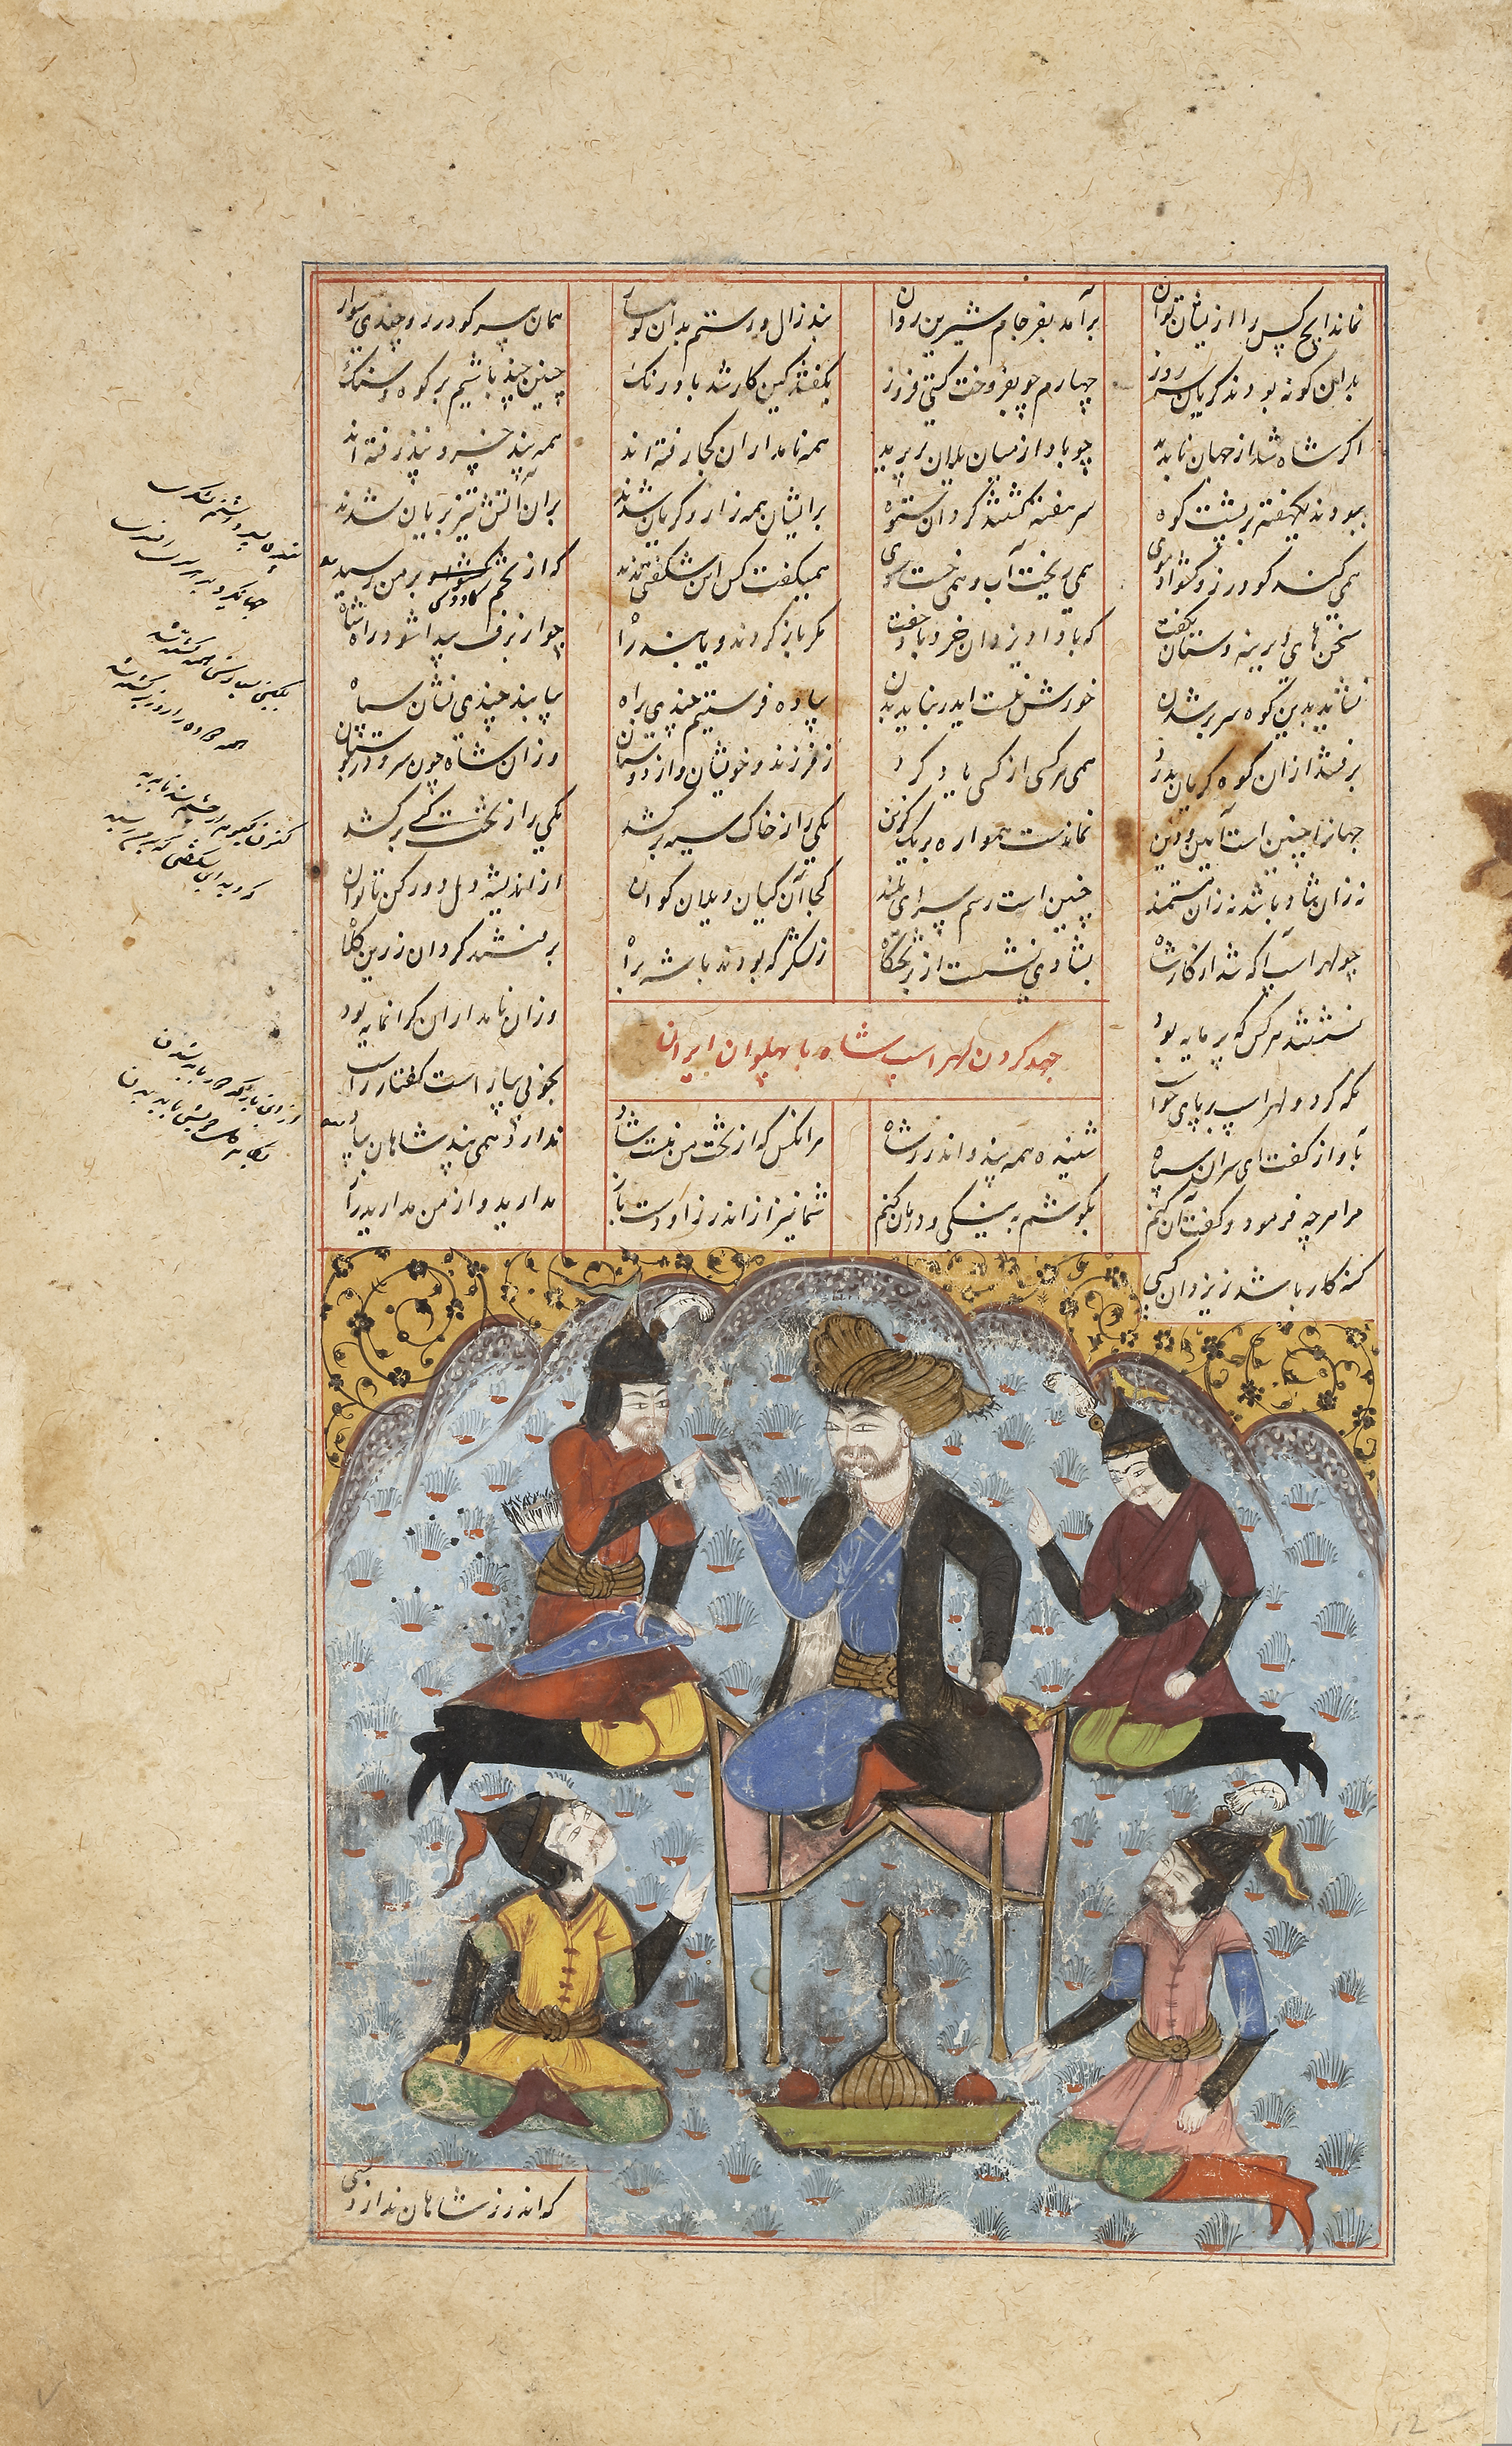 A FOLIO FROM A SHAHNAMEH, SHAH TAMASP WITH ATTENDANTS, PERSIA 17TH CENTURY - Image 2 of 4